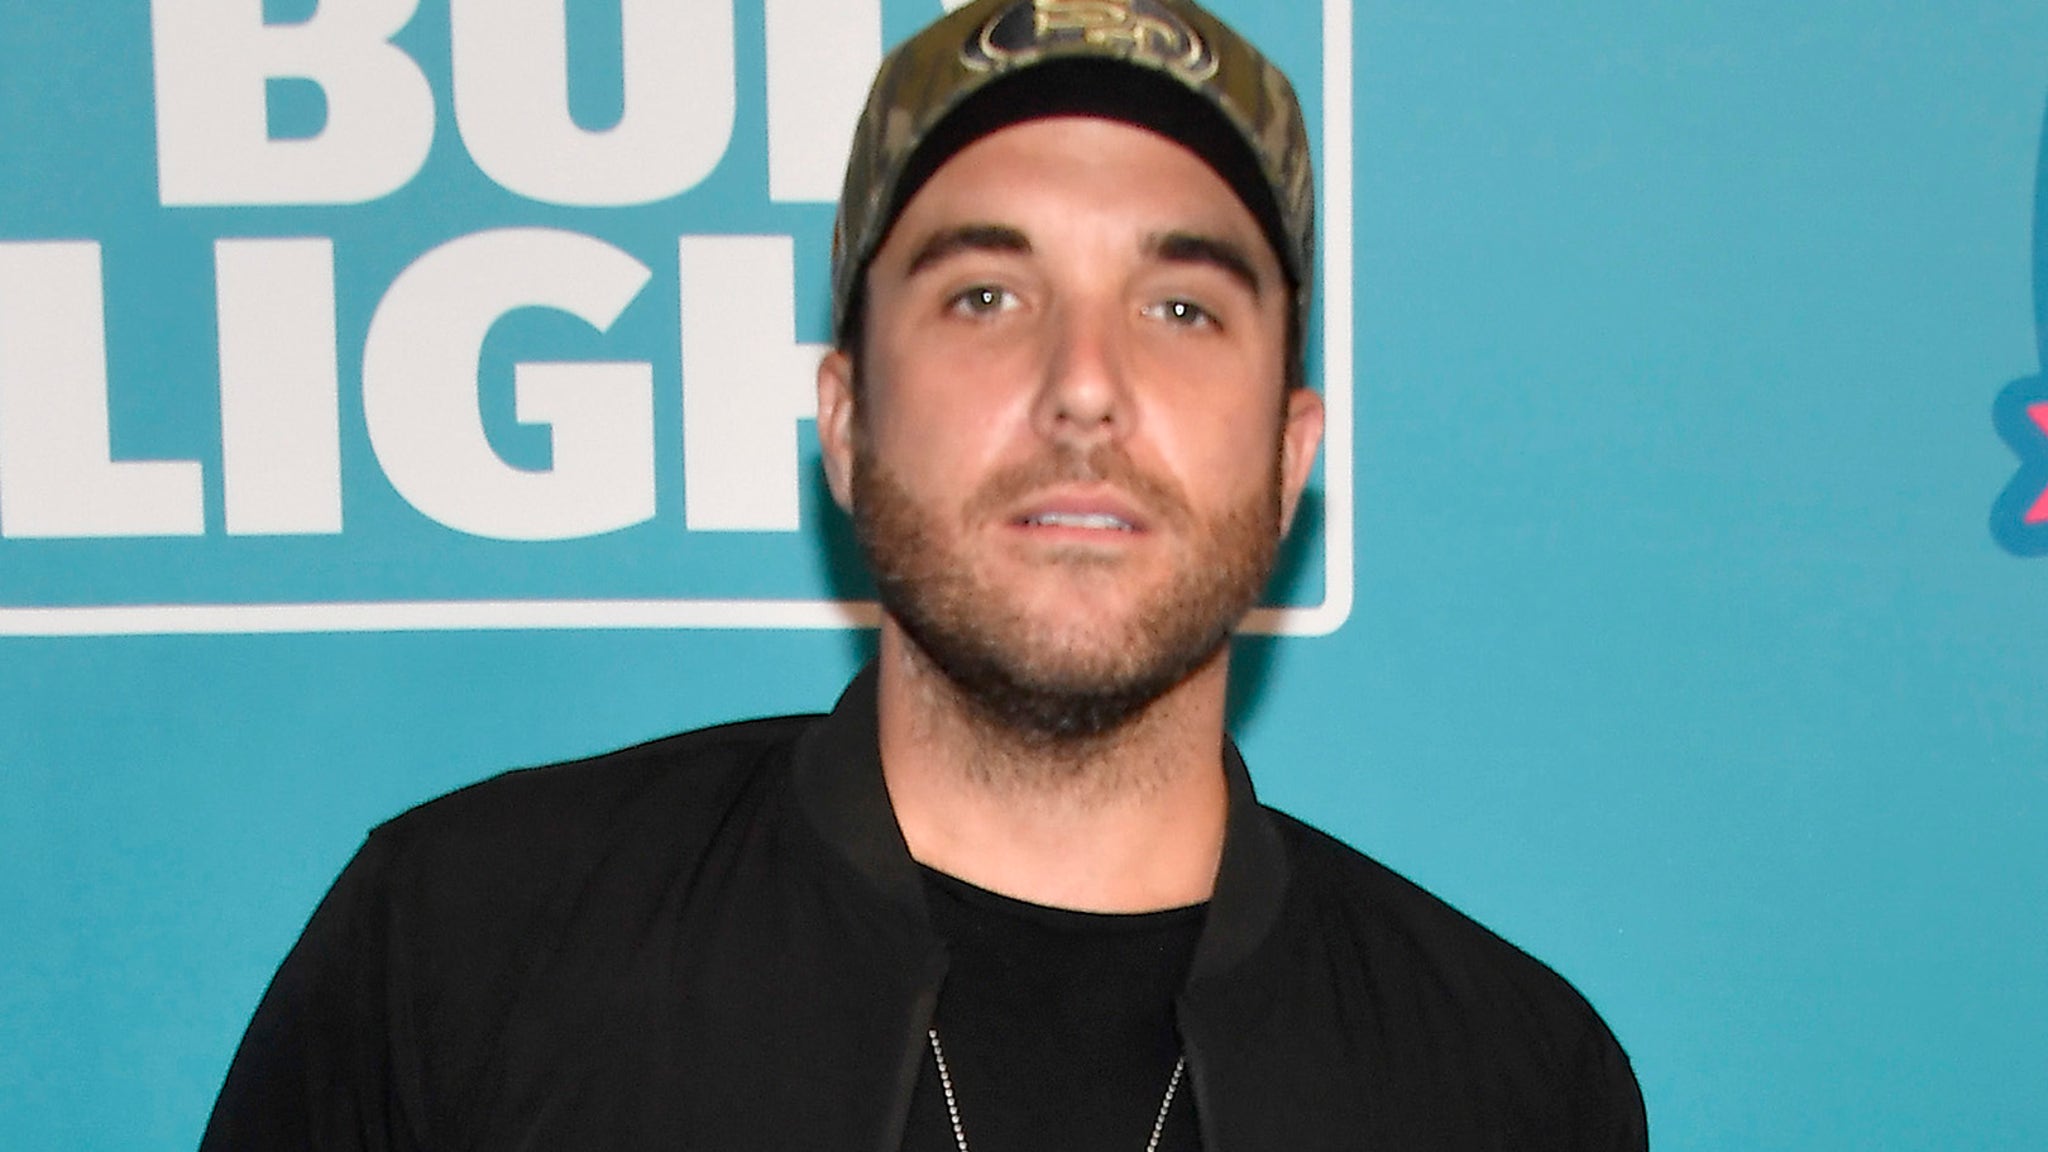 Country singer Tyler Rich talks about the discovery of the body during New Year’s Eve